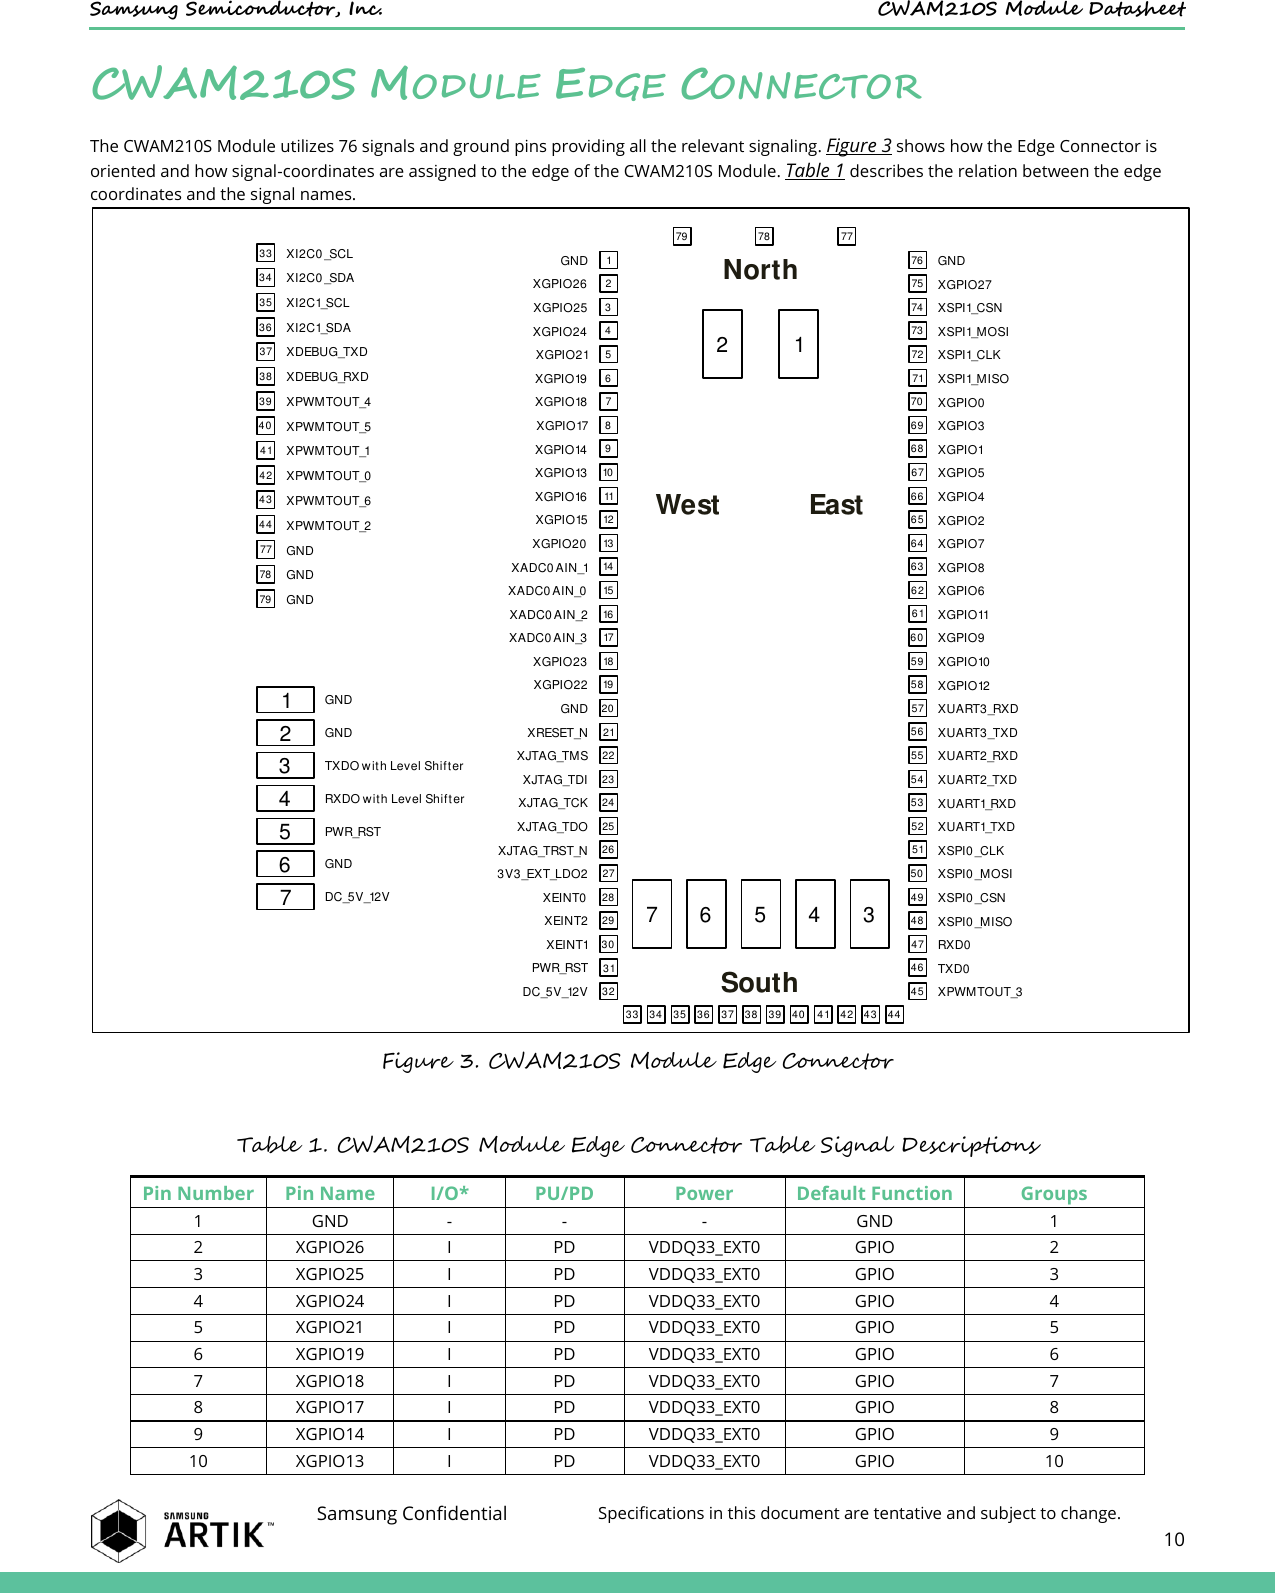    Samsung Semiconductor, Inc.  CWAM210S Module Datasheet    Samsung Confidential Specifications in this document are tentative and subject to change.  10  CWAM210S MODULE EDGE CONNECTOR The CWAM210S Module utilizes 76 signals and ground pins providing all the relevant signaling. Figure 3 shows how the Edge Connector is oriented and how signal-coordinates are assigned to the edge of the CWAM210S Module. Table 1 describes the relation between the edge coordinates and the signal names.  Figure 3. CWAM210S Module Edge Connector  Table 1. CWAM210S Module Edge Connector Table Signal Descriptions Pin Number Pin Name I/O* PU/PD Power Default Function Groups 1 GND - - - GND 1 2 XGPIO26 I PD VDDQ33_EXT0 GPIO 2 3 XGPIO25 I PD VDDQ33_EXT0 GPIO 3 4 XGPIO24 I PD VDDQ33_EXT0 GPIO 4 5 XGPIO21 I PD VDDQ33_EXT0 GPIO 5 6 XGPIO19 I PD VDDQ33_EXT0 GPIO 6 7 XGPIO18 I PD VDDQ33_EXT0 GPIO 7 8 XGPIO17 I PD VDDQ33_EXT0 GPIO 8 9 XGPIO14 I PD VDDQ33_EXT0 GPIO 9 10 XGPIO13 I PD VDDQ33_EXT0 GPIO 10 5872220921196101413181215171611424125327262823032312329GNDXGPIO26XGPIO25XGPIO24XGPIO21XGPIO19XGPIO18XGPIO17XGPIO14XGPIO13XGPIO16XGPIO15XGPIO20XADC0 AIN_1XADC0 AIN_0XADC0 AIN_2XADC0 AIN_3XGPIO23XGPIO22GNDXRESET_NXJTAG_TMSXJTAG_TDIXJTAG_TCKXJTAG_TDOXJTAG_TRST_N3V3_EXT_LDO2XEINT0XEINT2XEINT1PWR_RSTDC_5V_12V7269705557685658716763645965626061667353765274505149754745465448GNDXGPIO27XSPI1_CSNXSPI1_MOSIXSPI1_CLKXSPI1_MISOXGPIO0XGPIO3XGPIO1XGPIO5XGPIO4XGPIO2XGPIO7XGPIO8XGPIO6XGPIO11XGPIO9XGPIO10XGPIO12XUART3_RXDXUART3_TXDXUART2_RXDXUART2_TXDXUART1_RXDXUART1_TXDXSPI0 _CLKXSPI0 _MOSIXSPI0 _CSNXSPI0 _MISORXD0TXD0XPWMTOUT_333 34 35 36 37 38 39 40 41 42 43 44NorthWest EastSouth79 78 77XI2C0 _SCLXI2C0 _SDAXI2C1_SCLXI2C1_SDAXDEBUG_TXDXDEBUG_RXDXPWMTOUT_4XPWMTOUT_5XPWMTOUT_1XPWMTOUT_0XPWMTOUT_6XPWMTOUT_2343336373938404244433541GNDGNDGND7779782 17 6 4 351234567GNDGNDTXDO with Level ShifterRXDO with Level ShifterPWR_RSTGNDDC_5V_12V